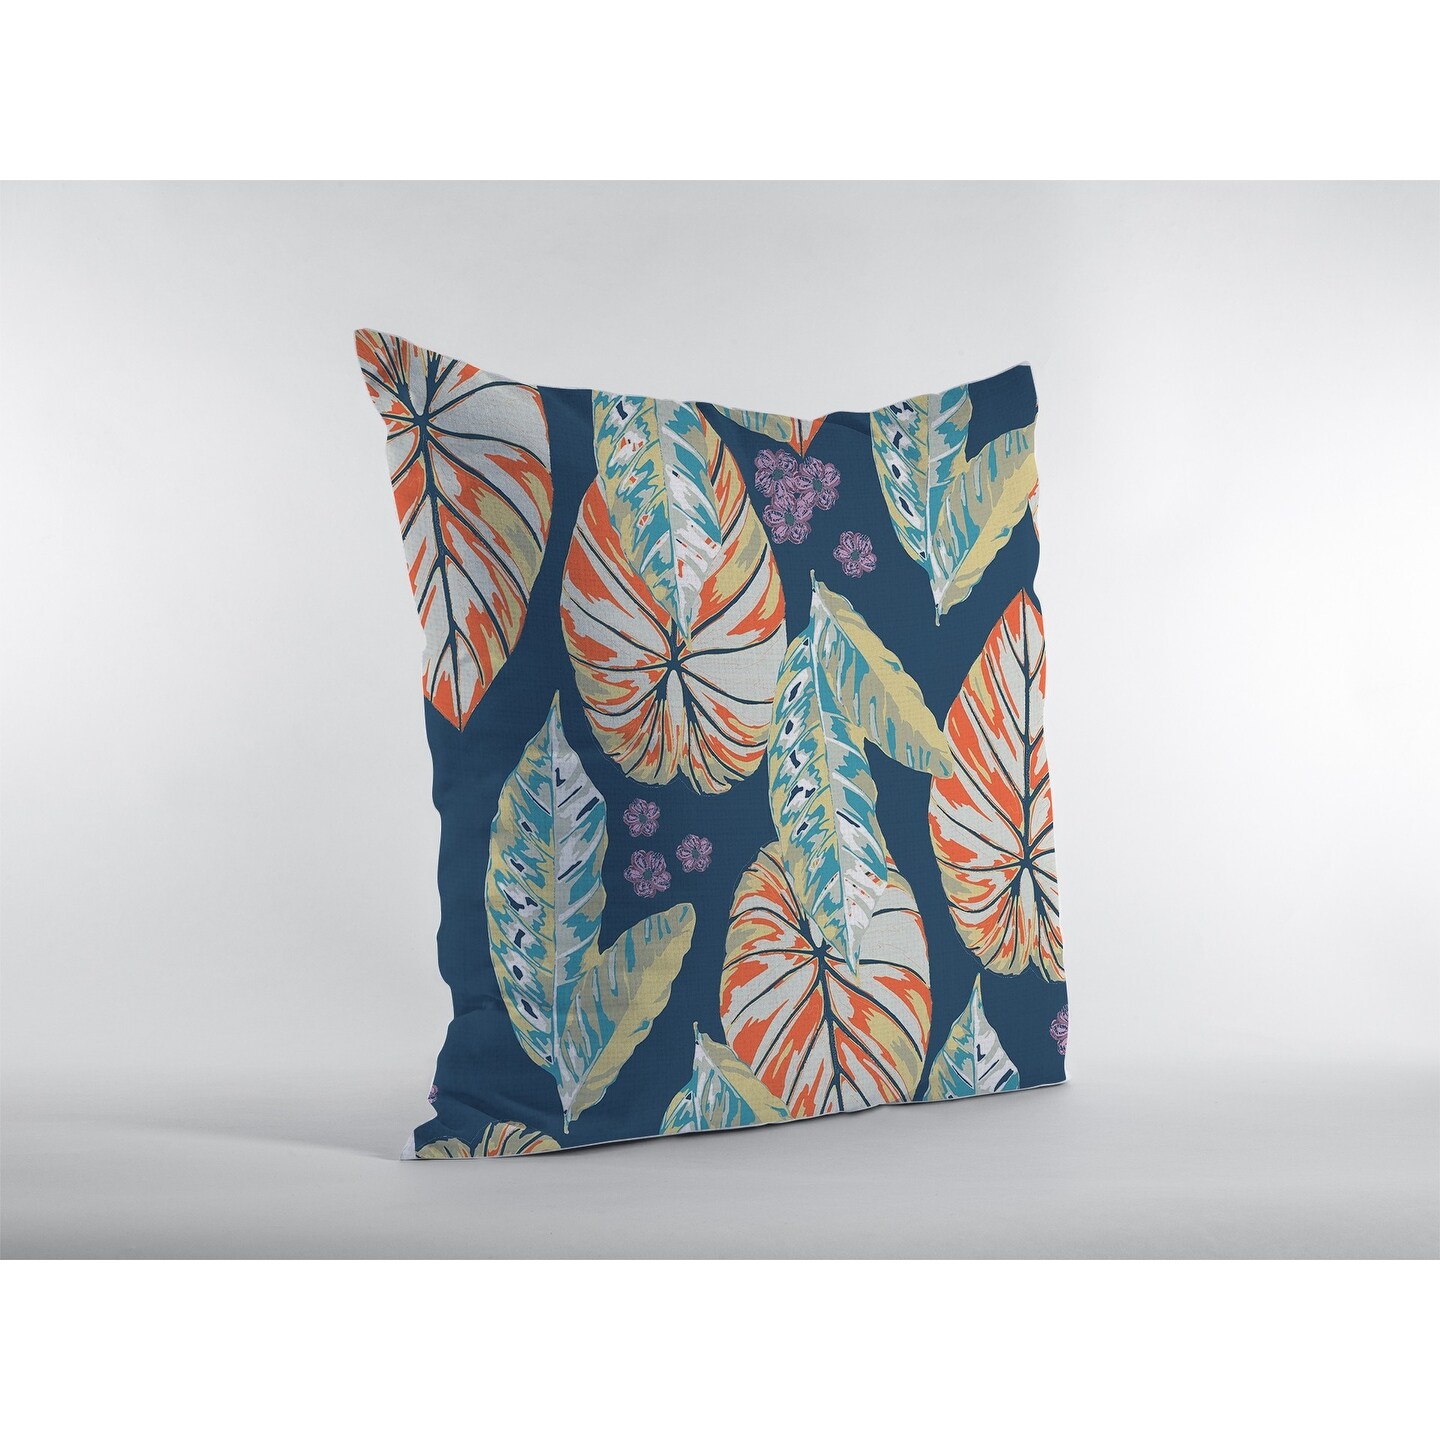 https://ak1.ostkcdn.com/images/products/is/images/direct/e6008b0017e1c24645147d813a4f85b96d6878a0/16%22-Orange-Blue-Tropical-Leaf-Zippered-Suede-Throw-Pillow.jpg